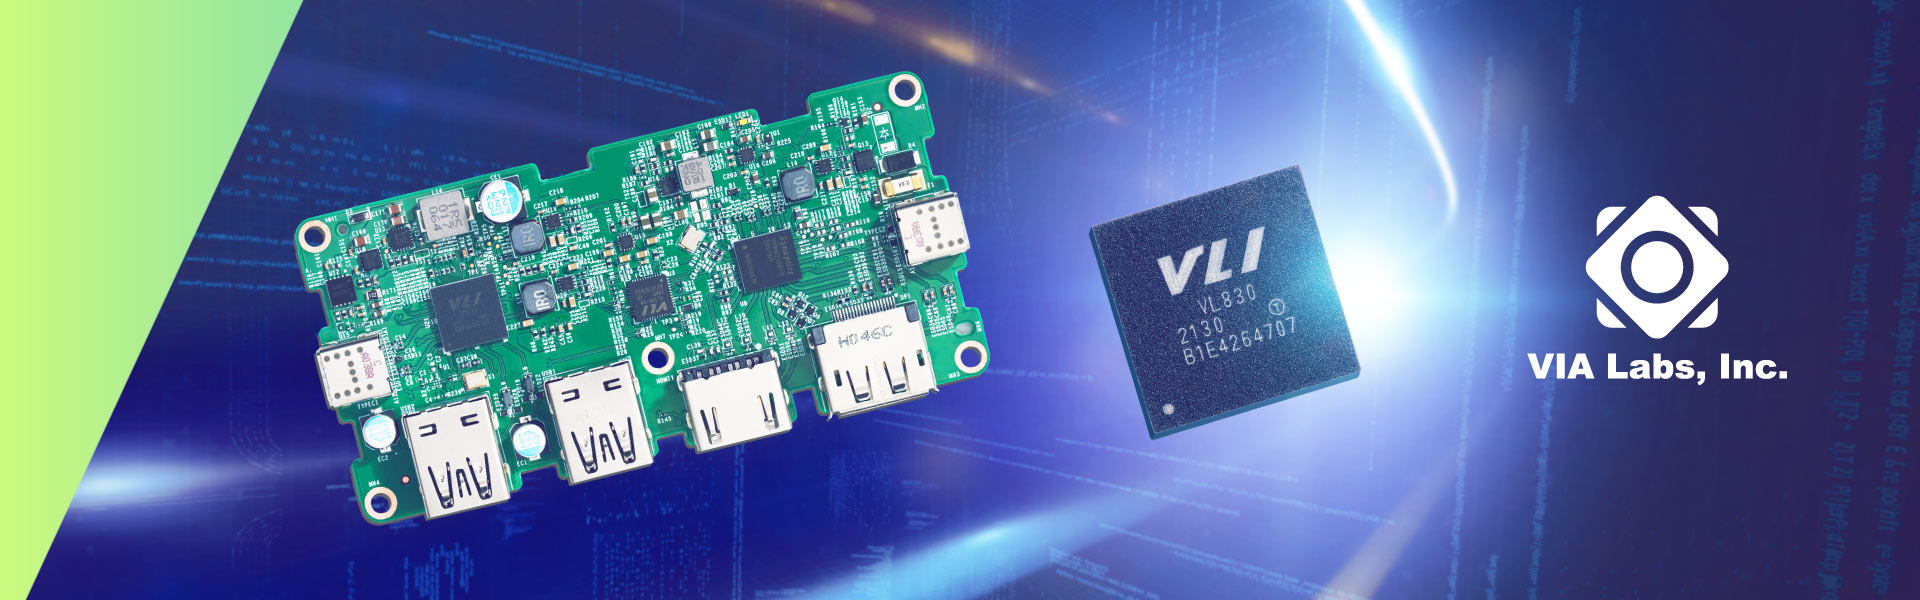 VIA Labs Announces Launch of USB4 Endpoint Device Silicon